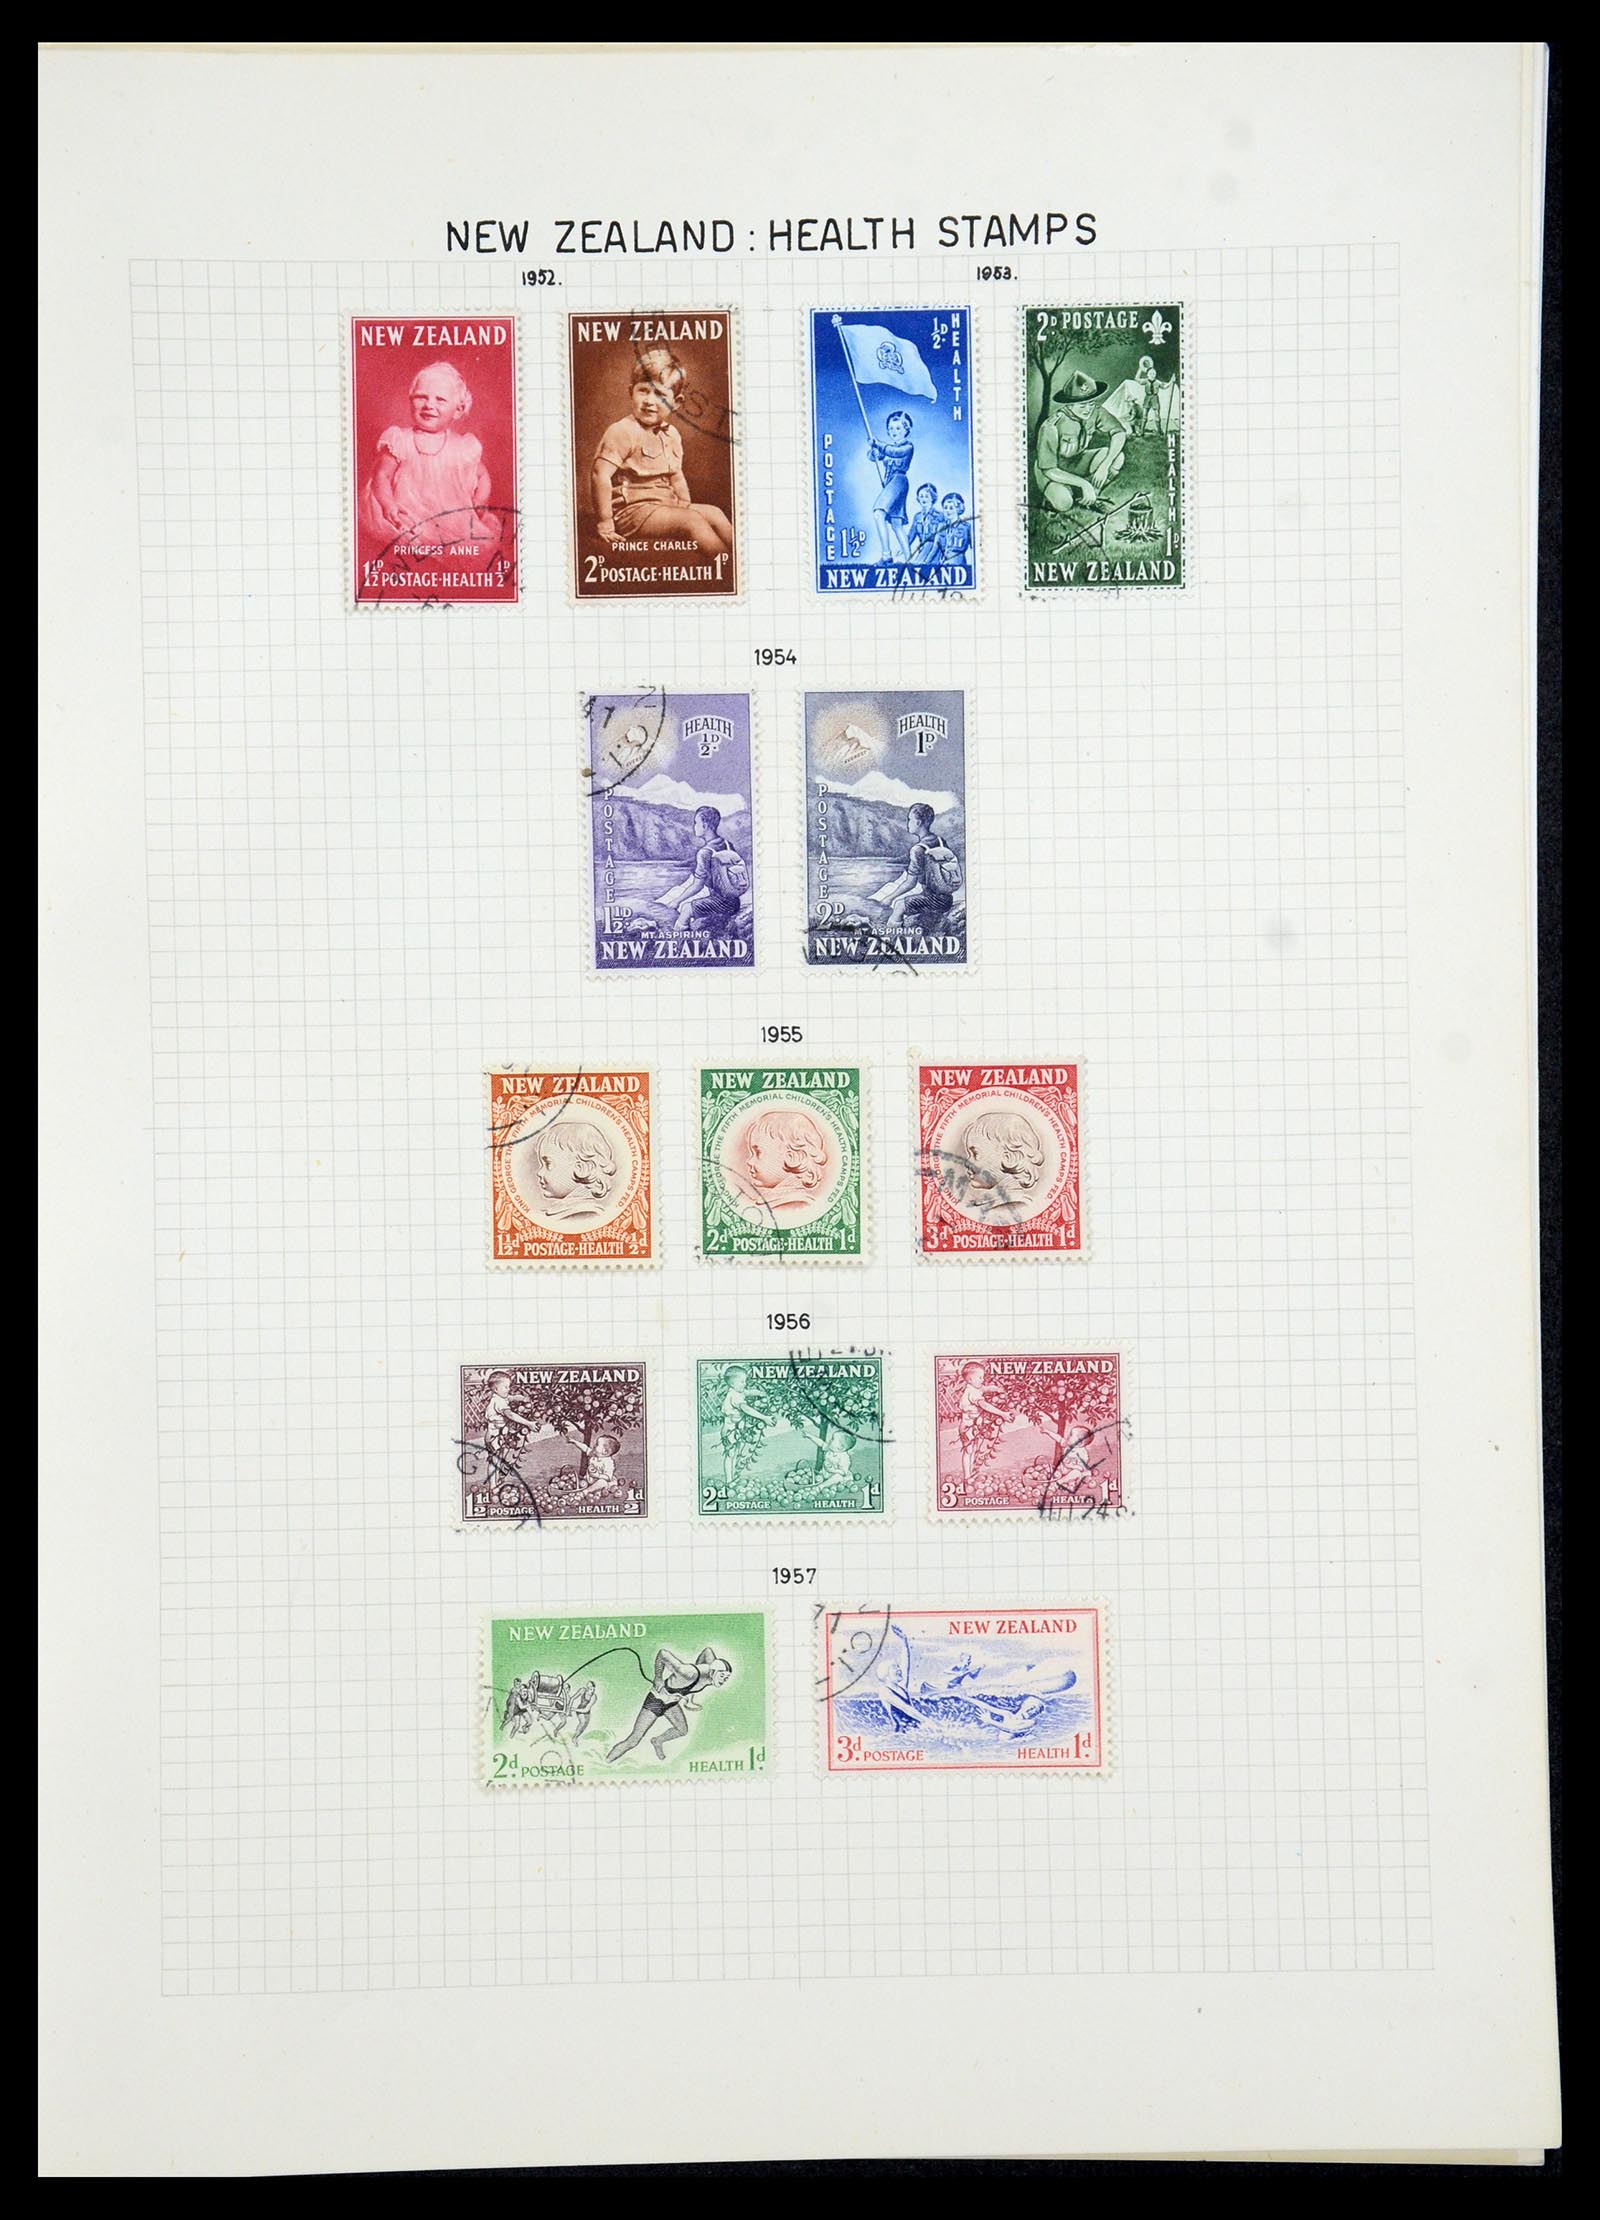 35500 050 - Stamp Collection 35500 British Commonwealth supercollection 1855-1970.